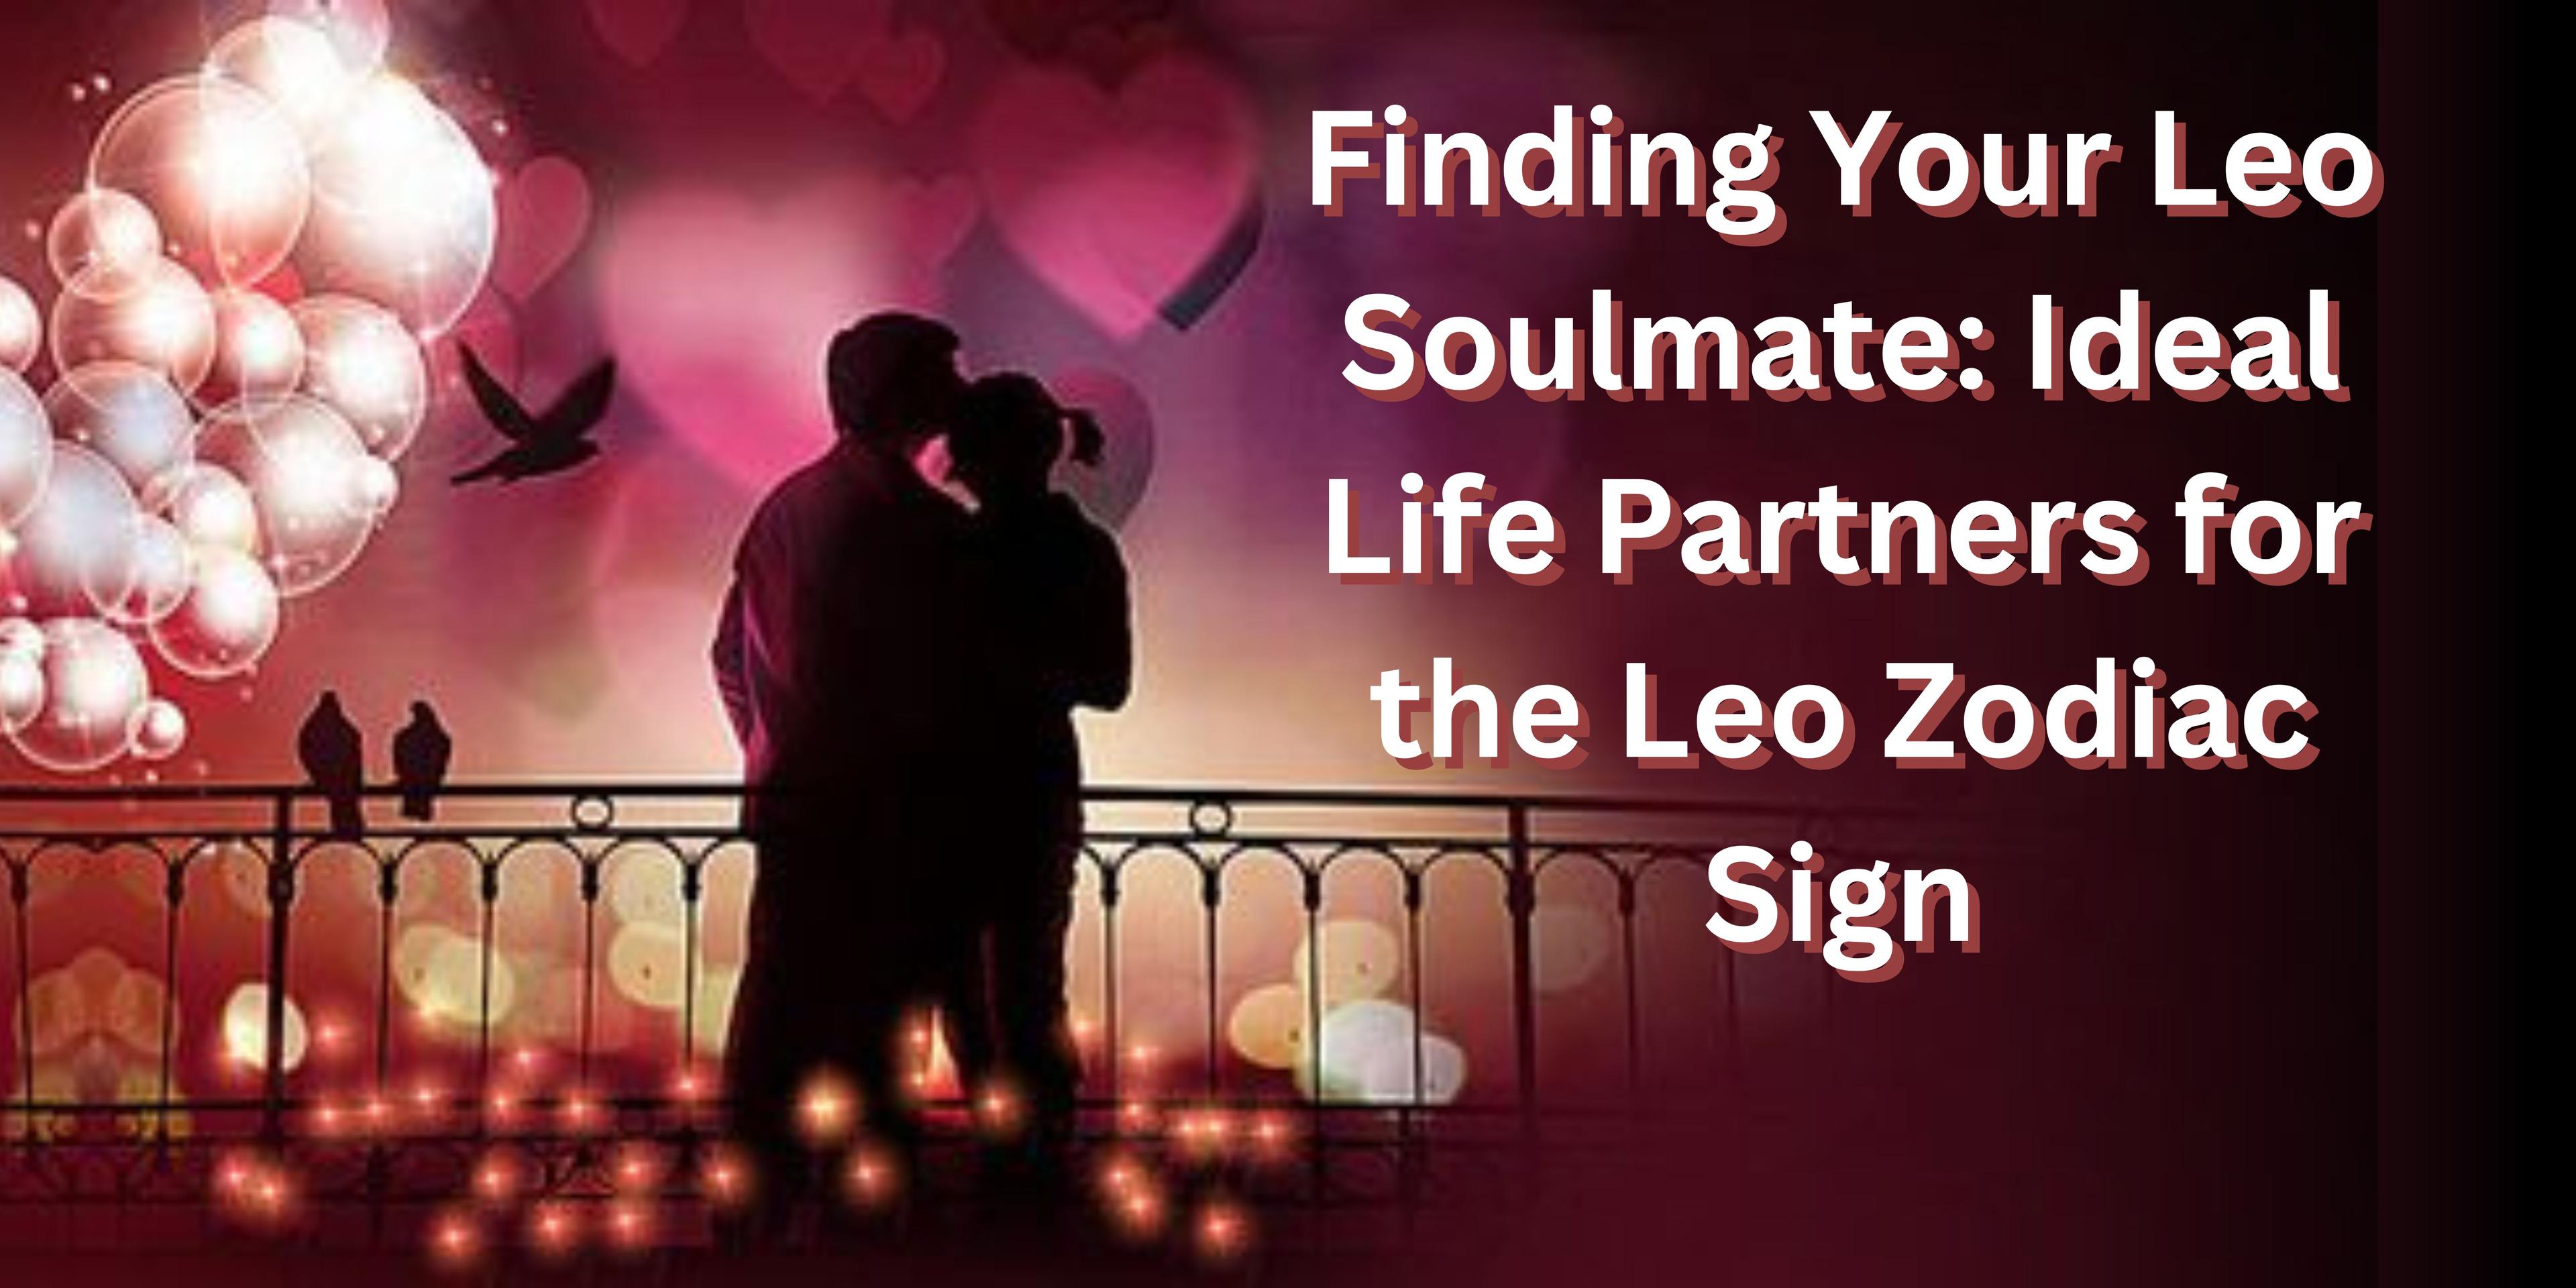 Ideal Life Partners for Leo Zodiac Sign